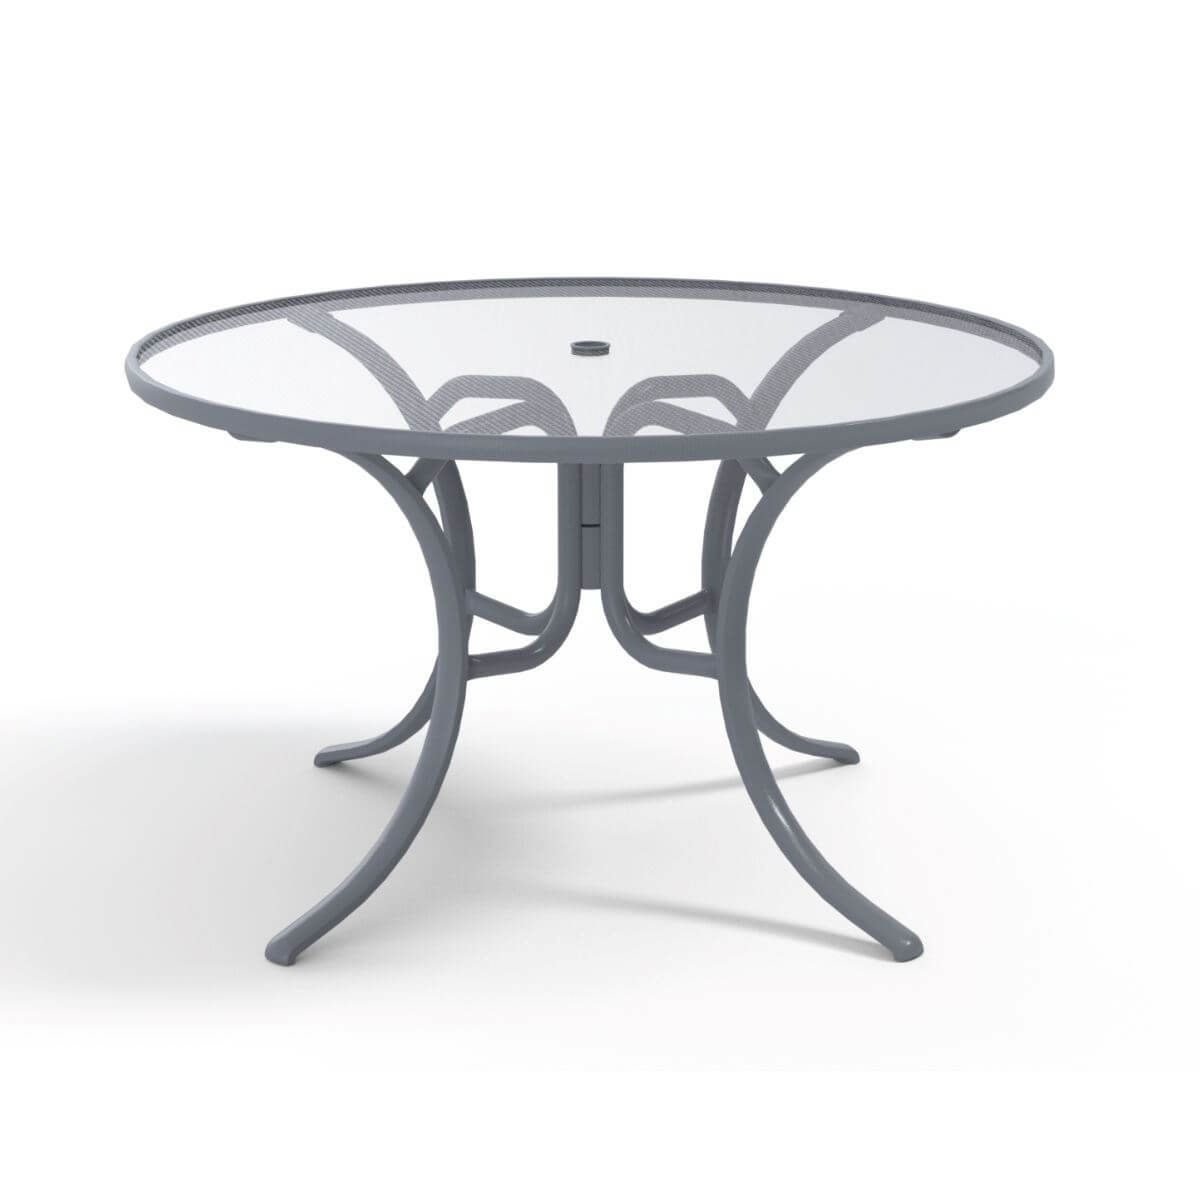 Dining Table 48 Inch Round Glass Aluminum Frame Pool Furniture Supply